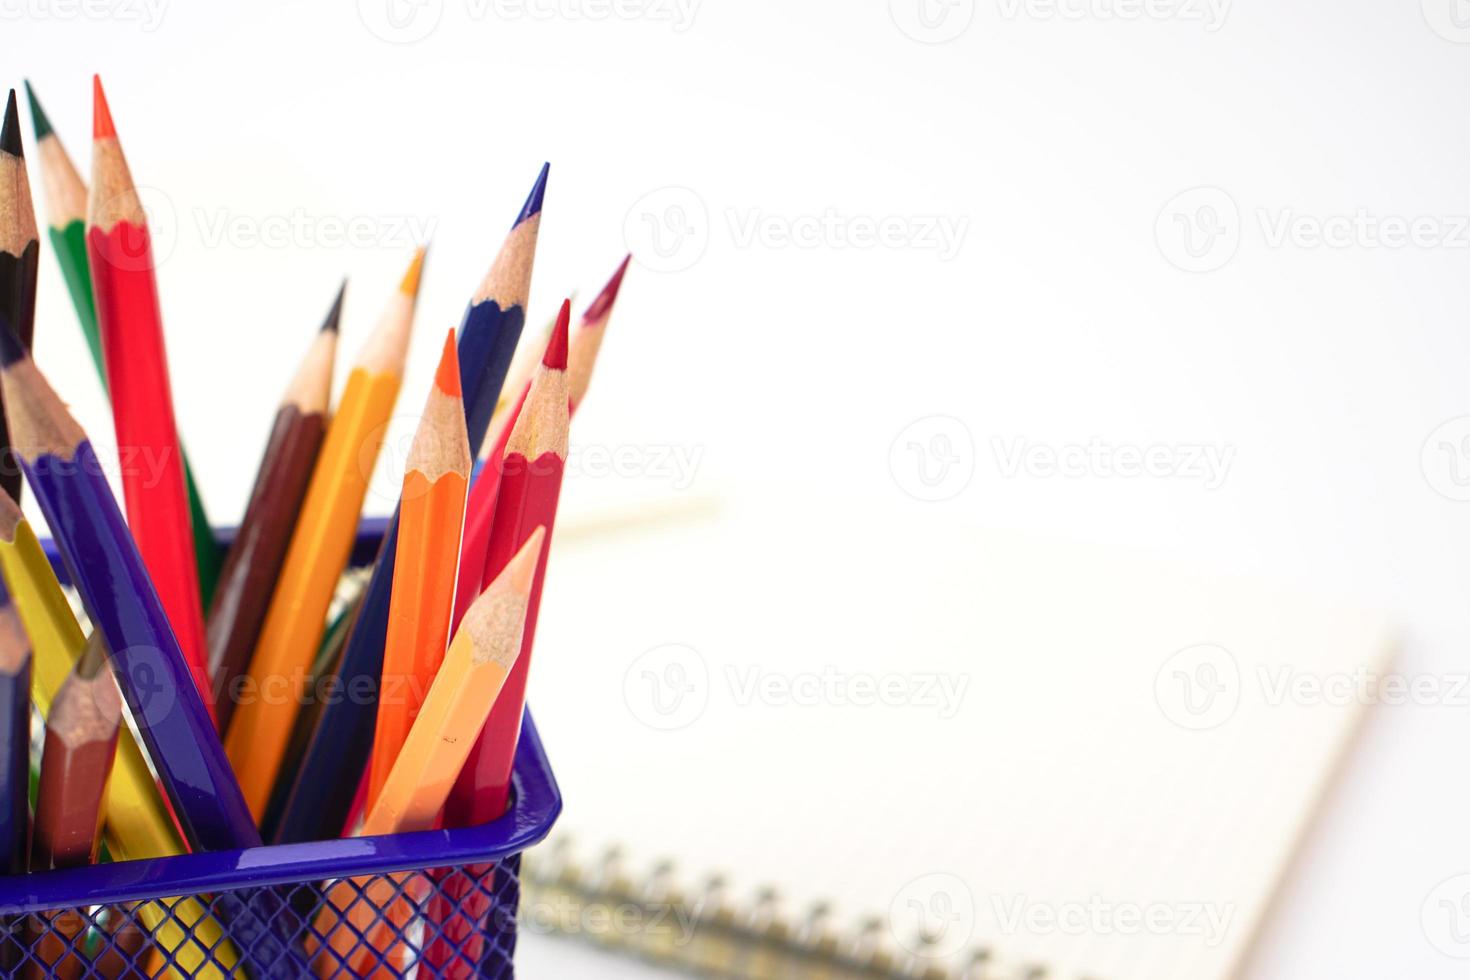 Crayon or colored pencils in box and the book placed in the blurred background. photo